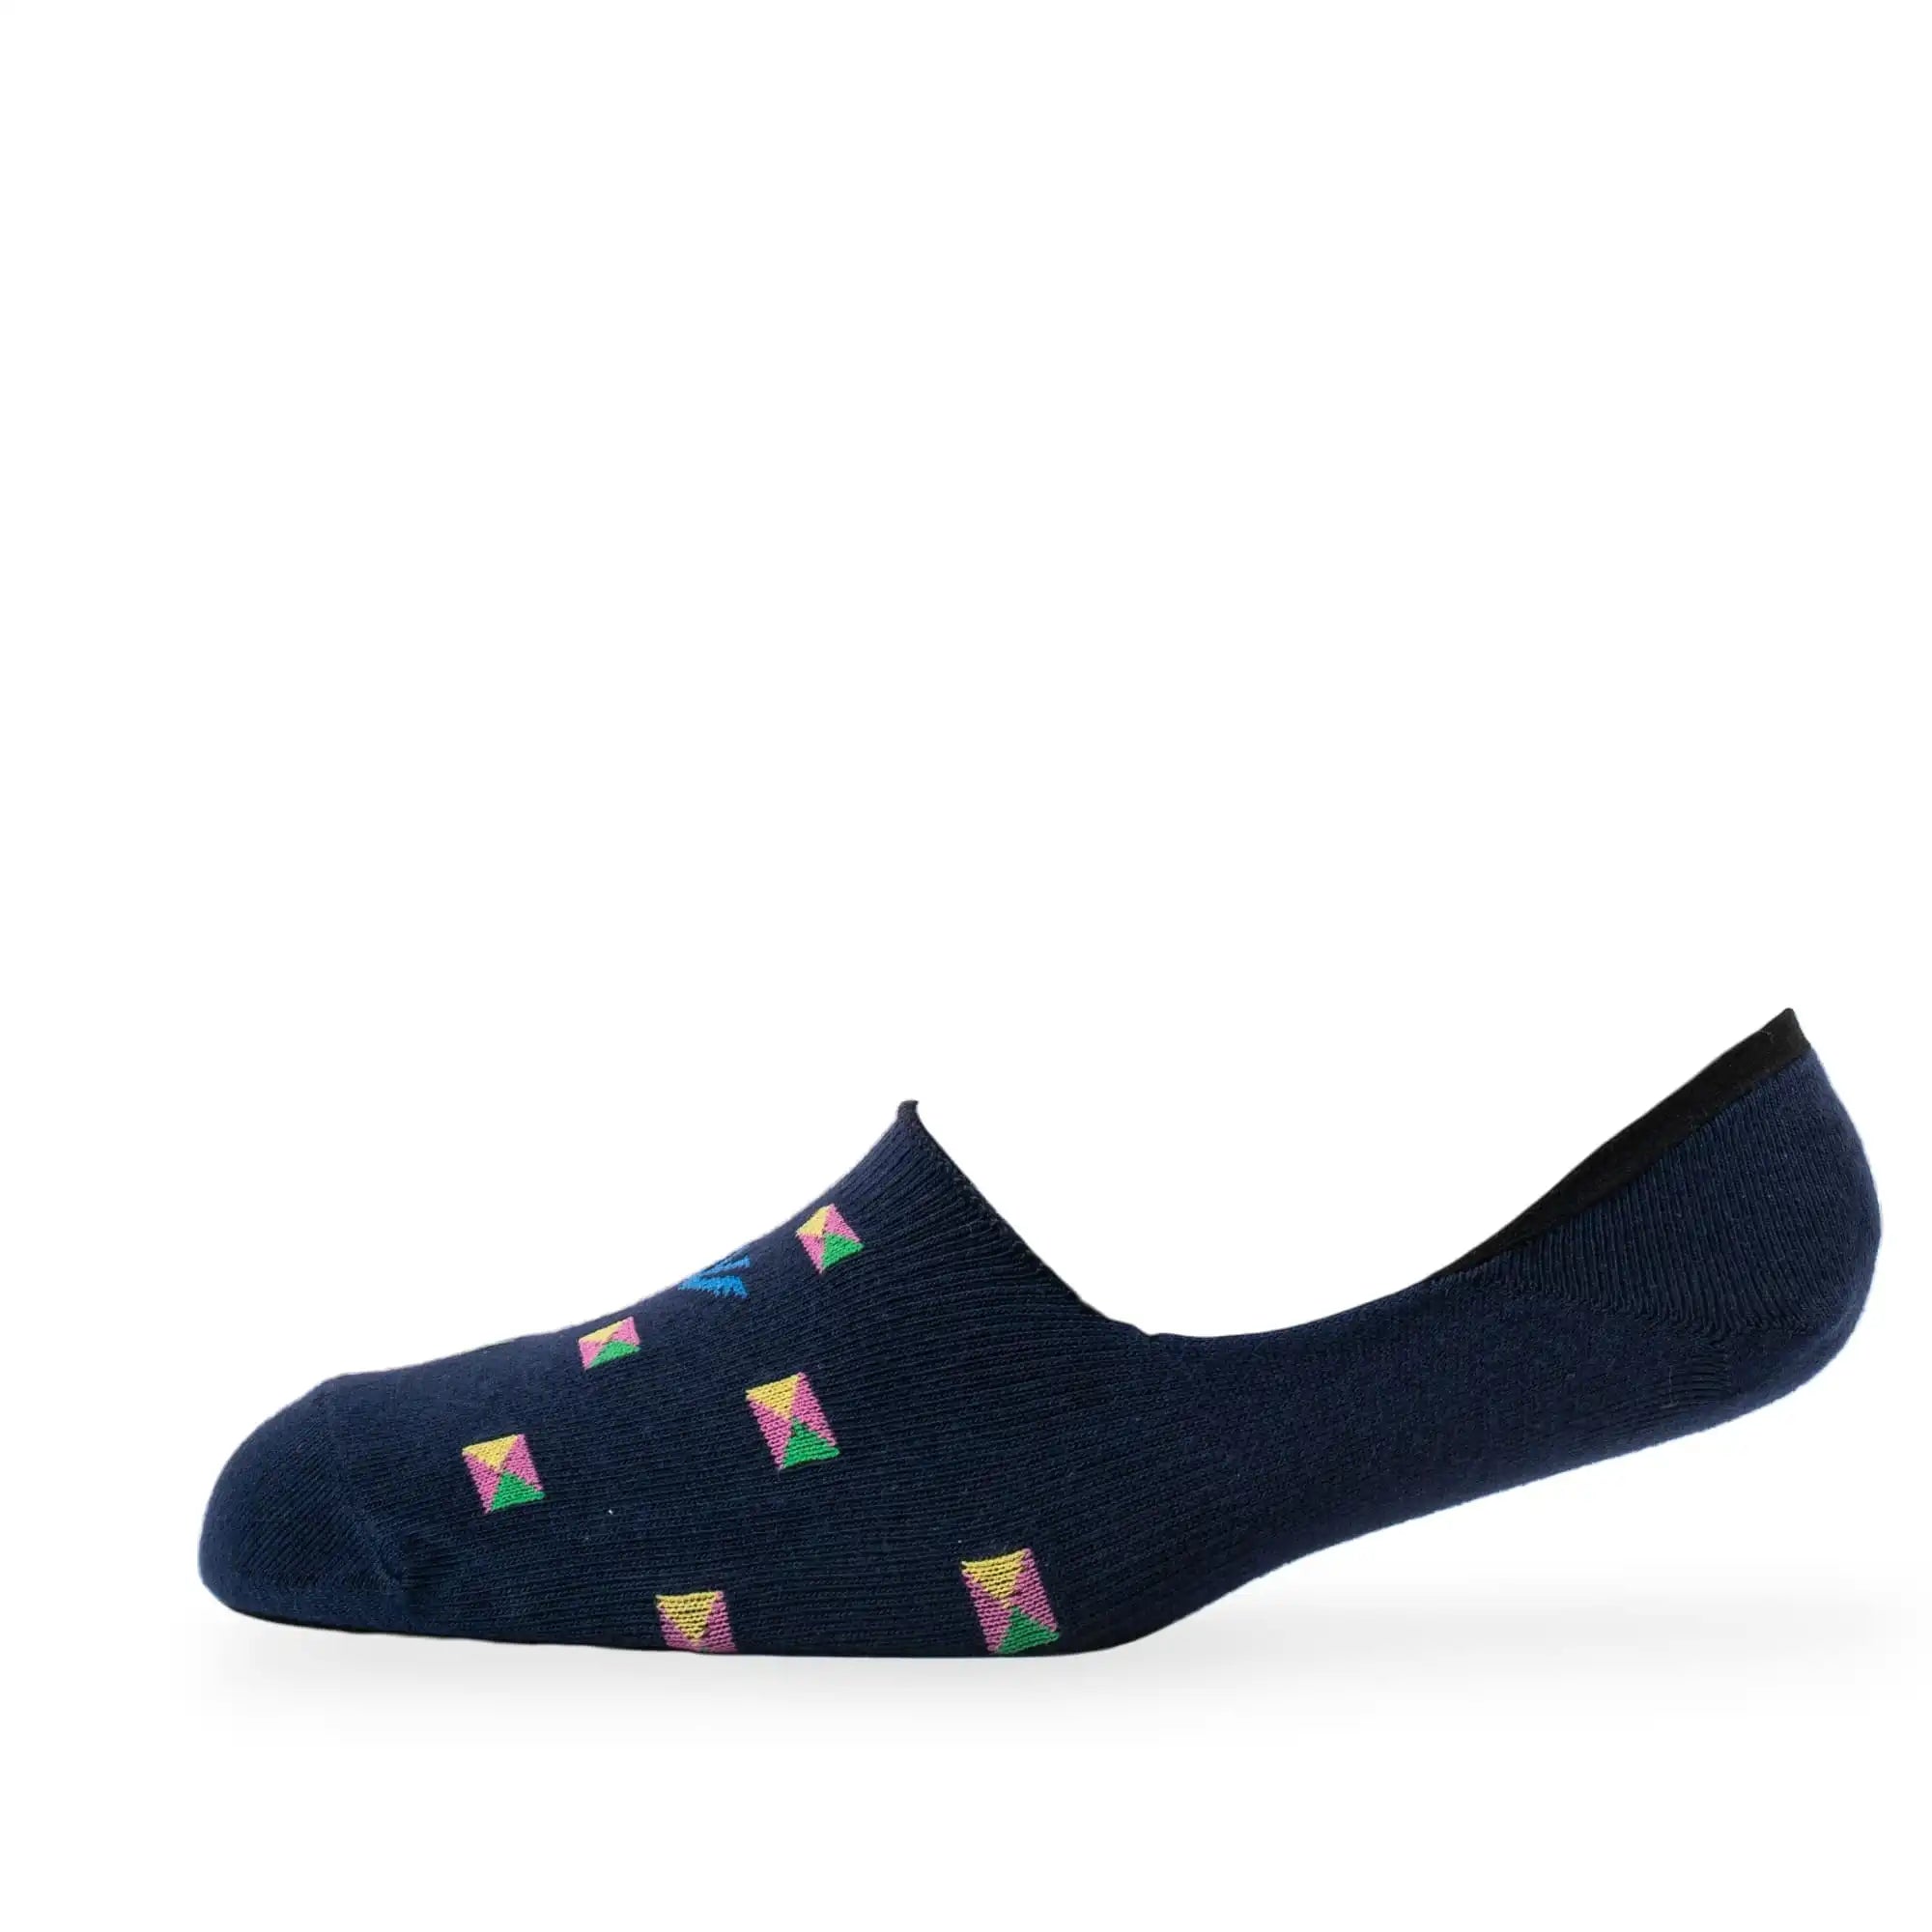 Young Wings Men's Multi Colour Cotton Fabric Design No-Show Socks - Pack of 5, Style no. M1-107 N